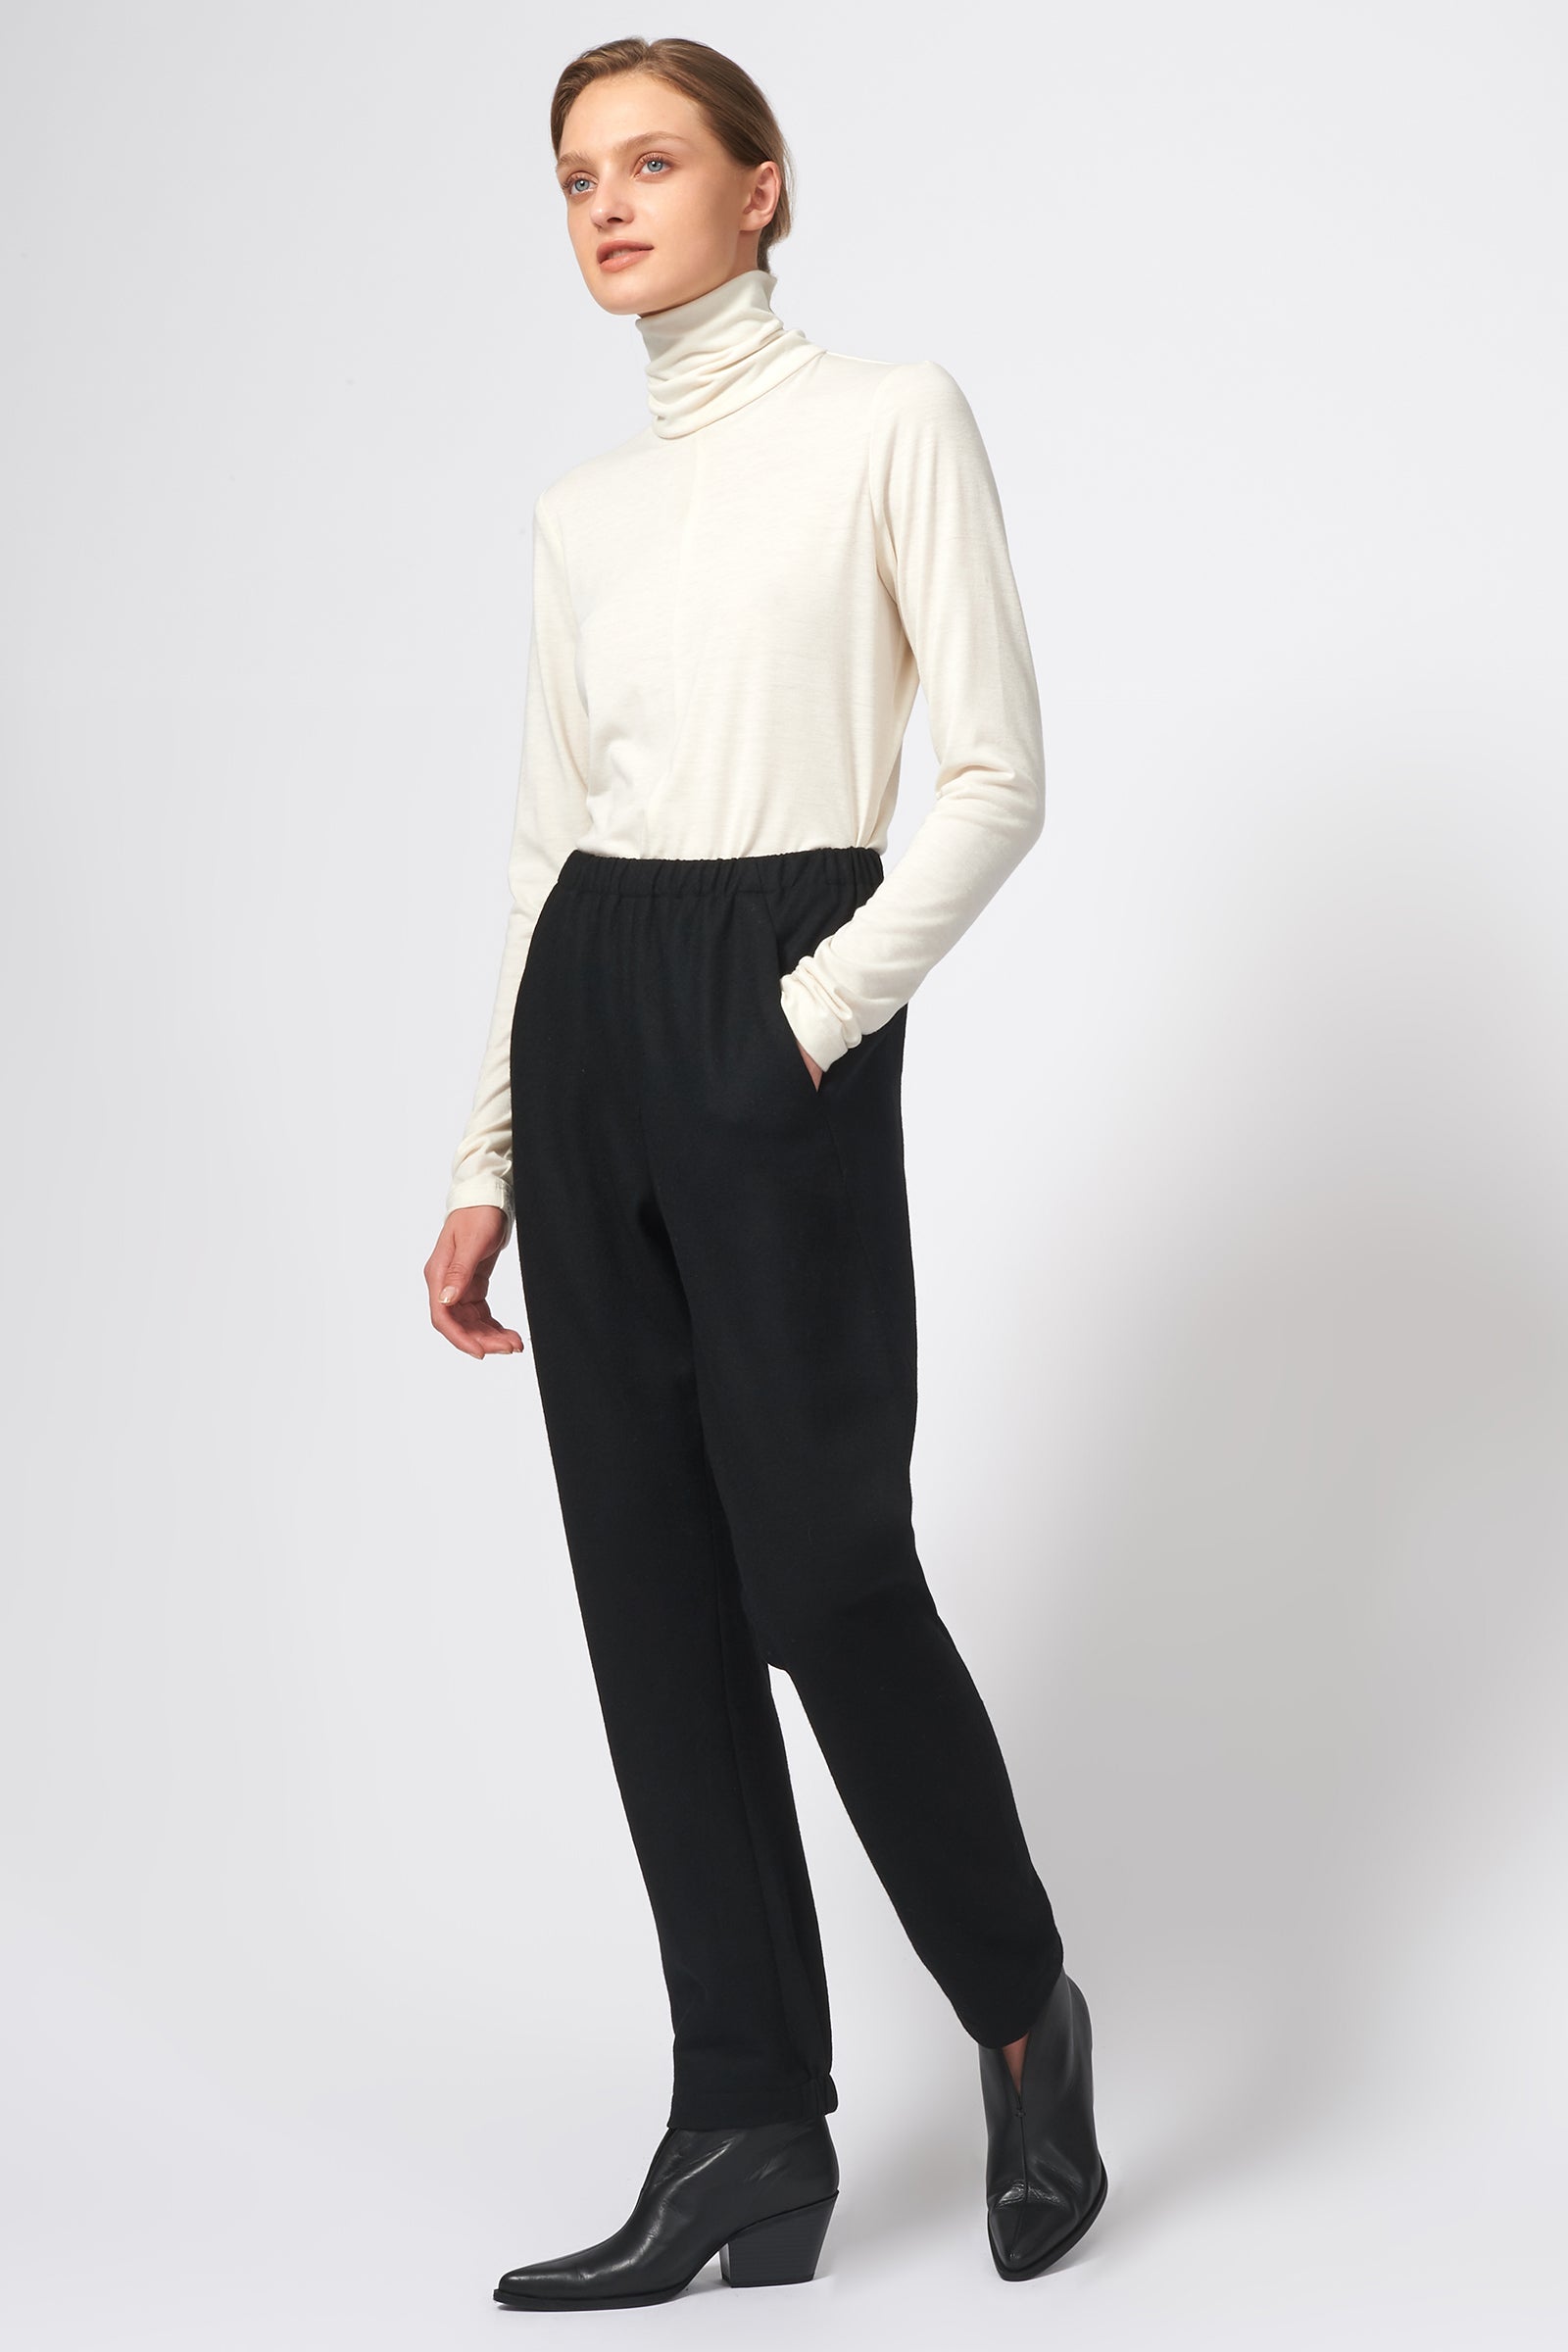 Felted Jersey Wide Leg Pant in Black Made in 100% Japanese Wool